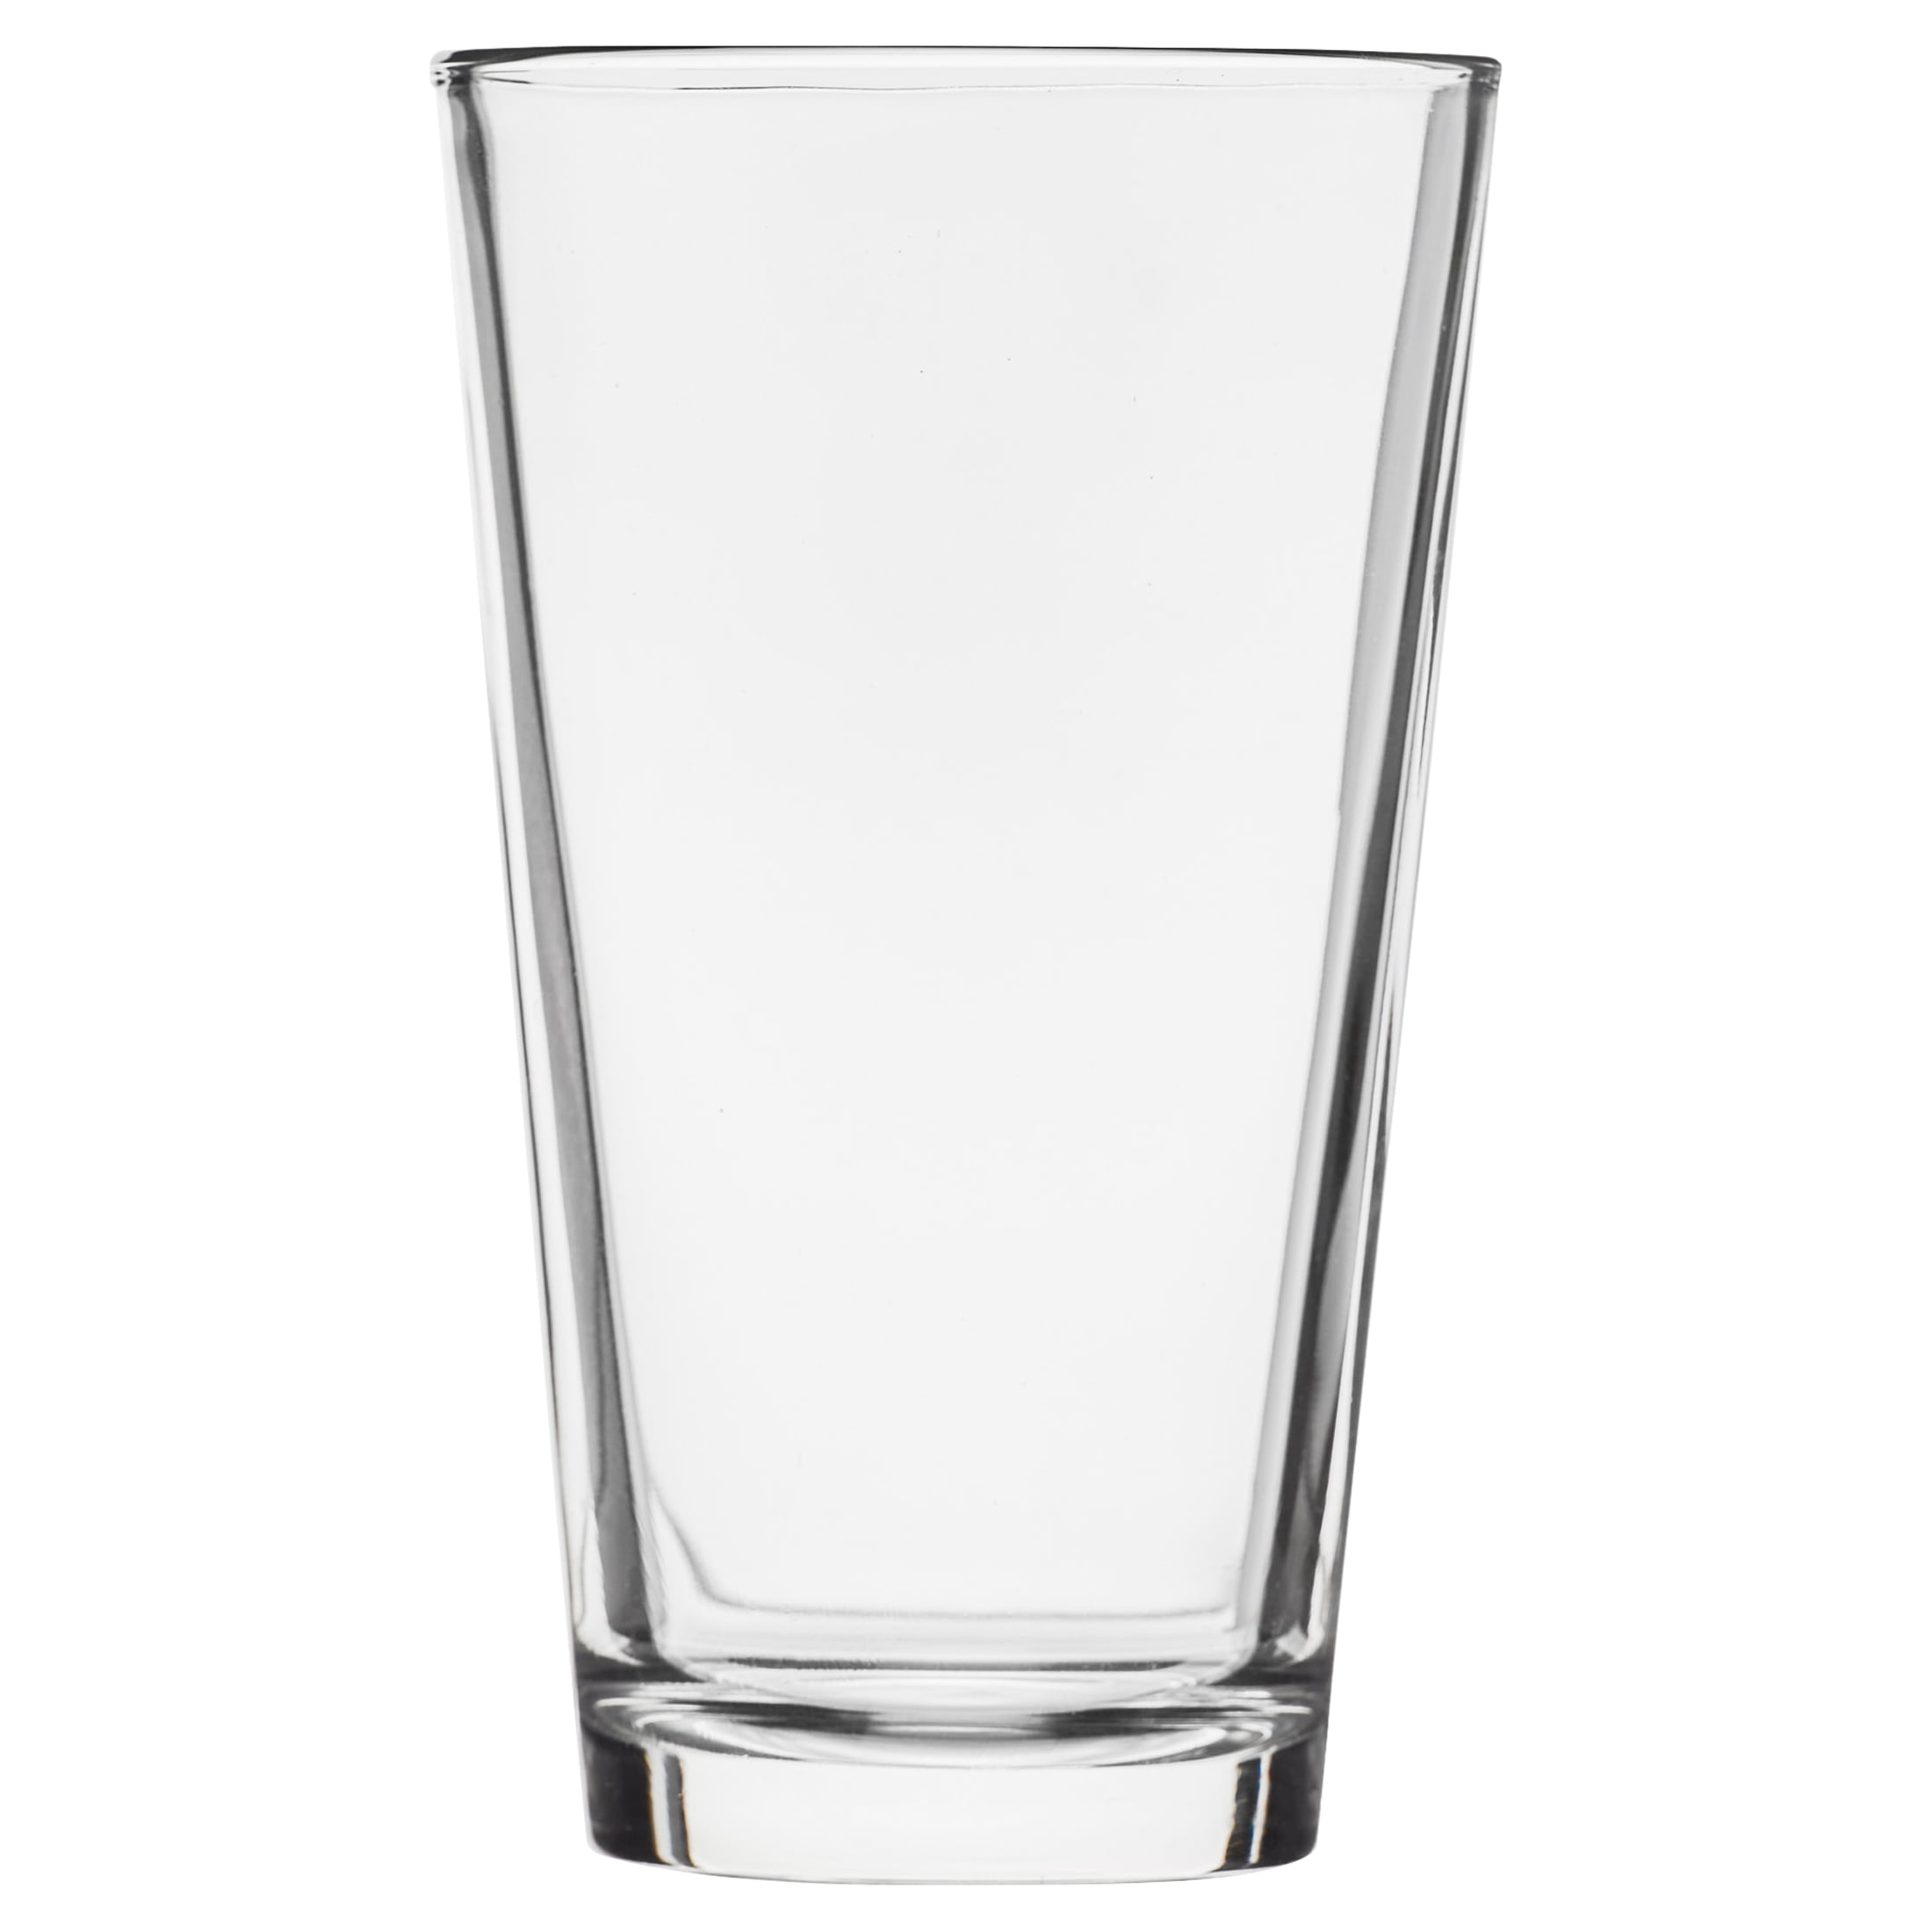 Mainstays 16-Ounce All-Purpose Cooler Glasses, Set of 12